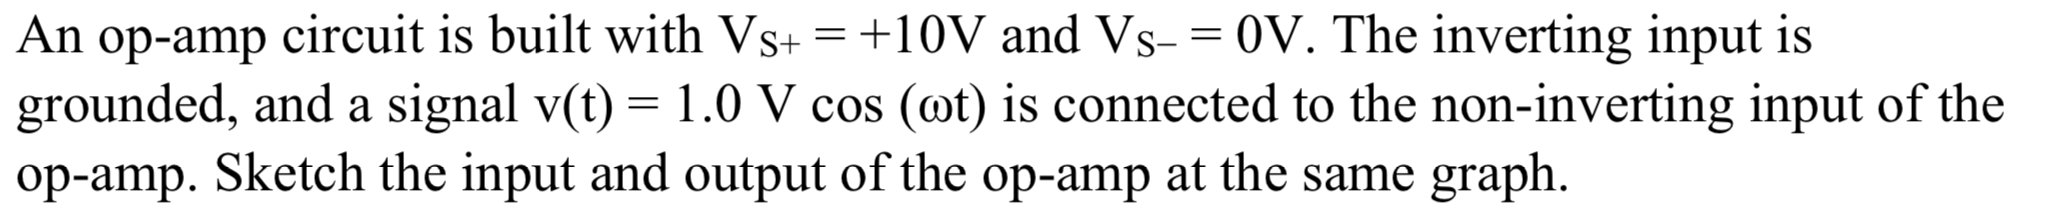 An op-amp circuit is built with Vs+ = +10V and Vs- = 0V. The inverting input is
grounded, and a signal v(t) = 1.0 V cos (@t) is connected to the non-inverting input of the
op-amp. Sketch the input and output of the op-amp at the same graph.
